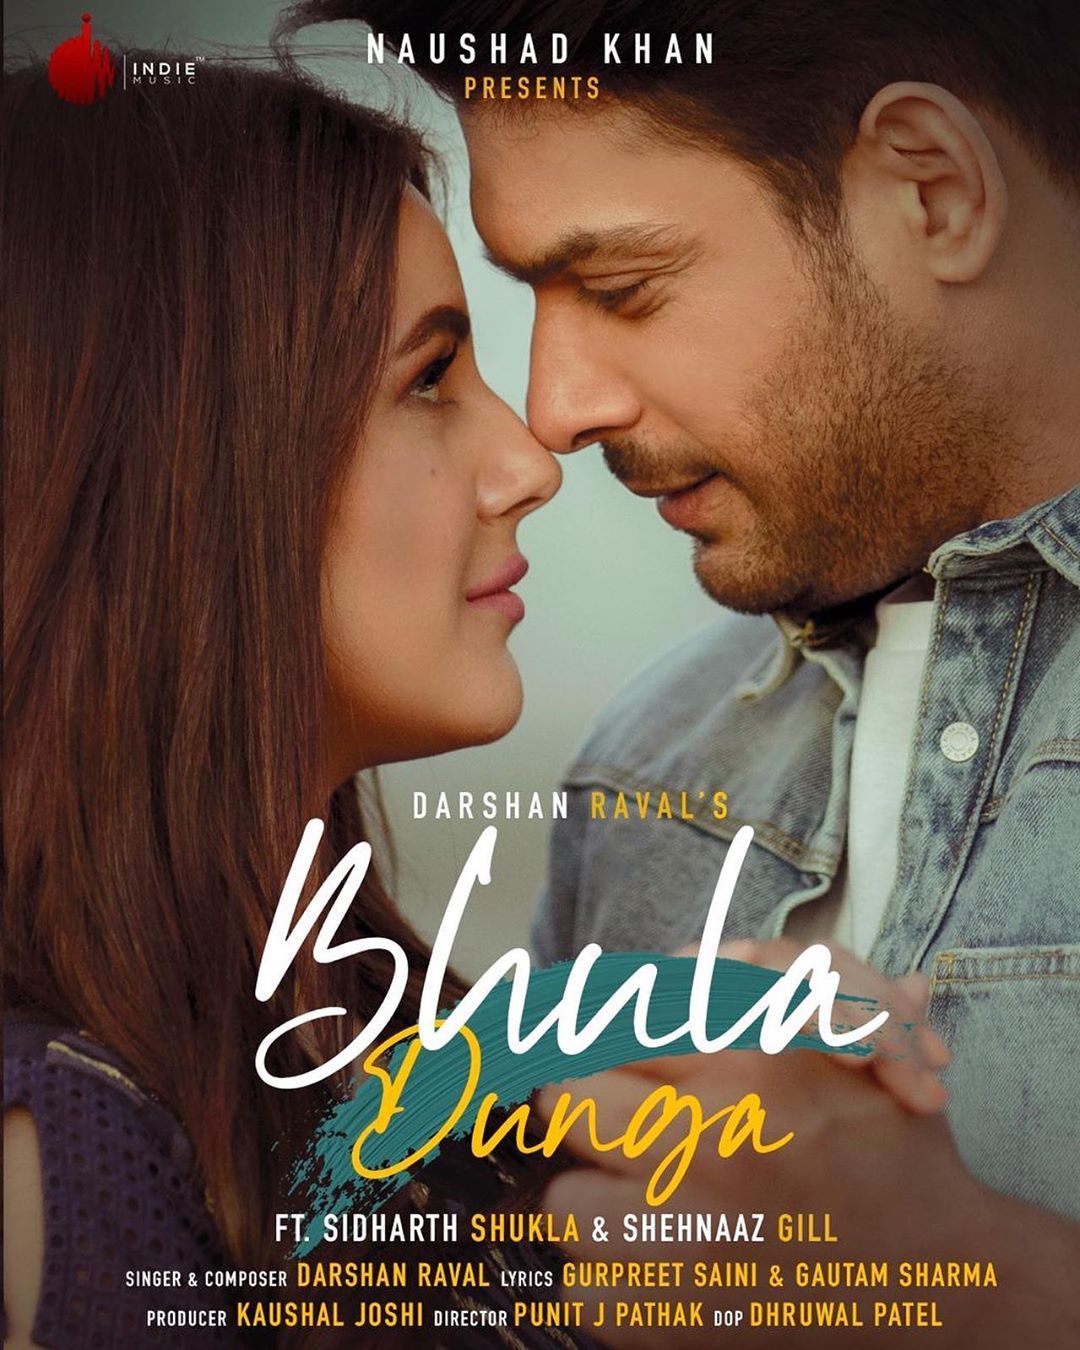 Sidharth Shukla, Shehnaaz Gill's 'Undeniable Chemistry' In The First Look Of Their Music Video 'Bhula Dena' Will Make You Want More